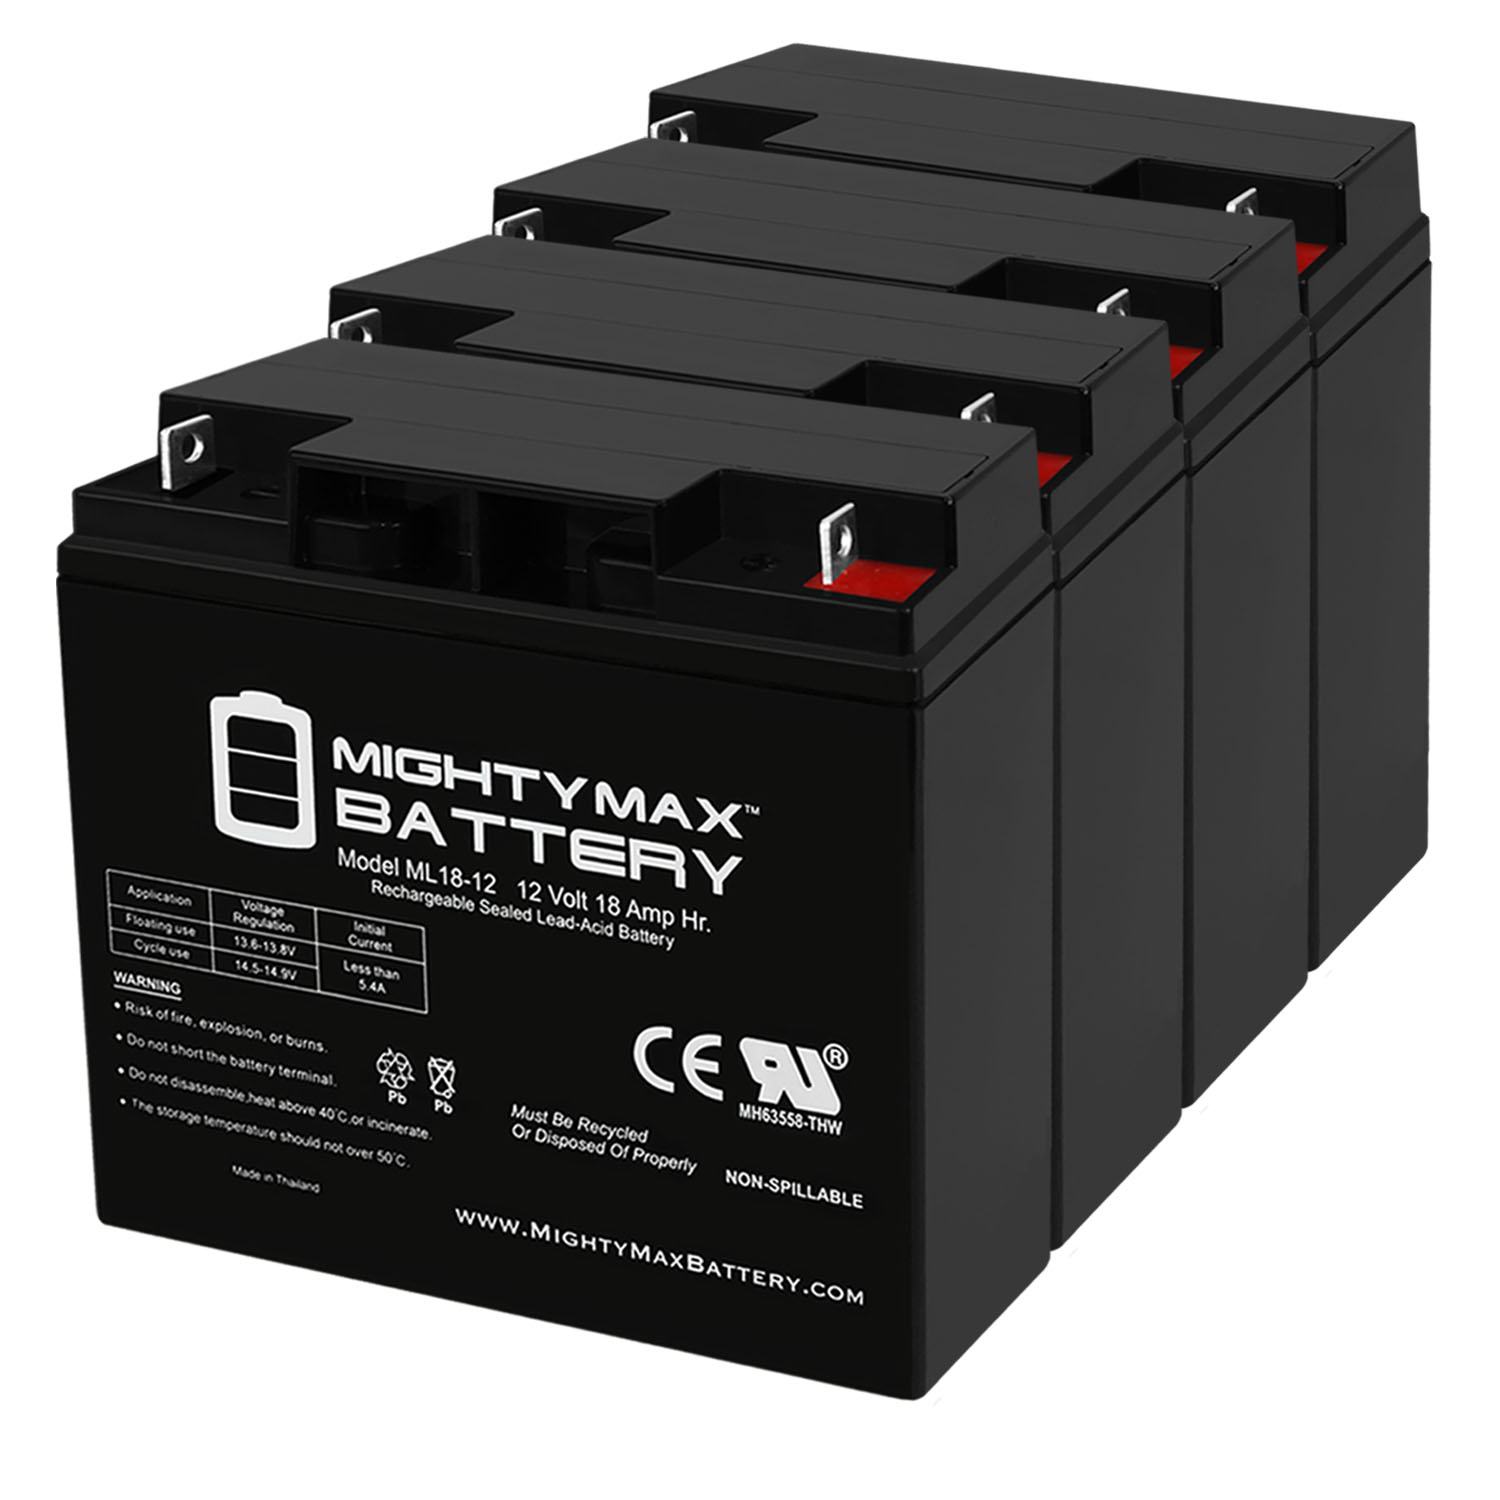 ML18-12 - 12V 18AH M6/T6 Audio System Battery Replaces Odyssey PC680 - 4 Pack - image 1 of 6